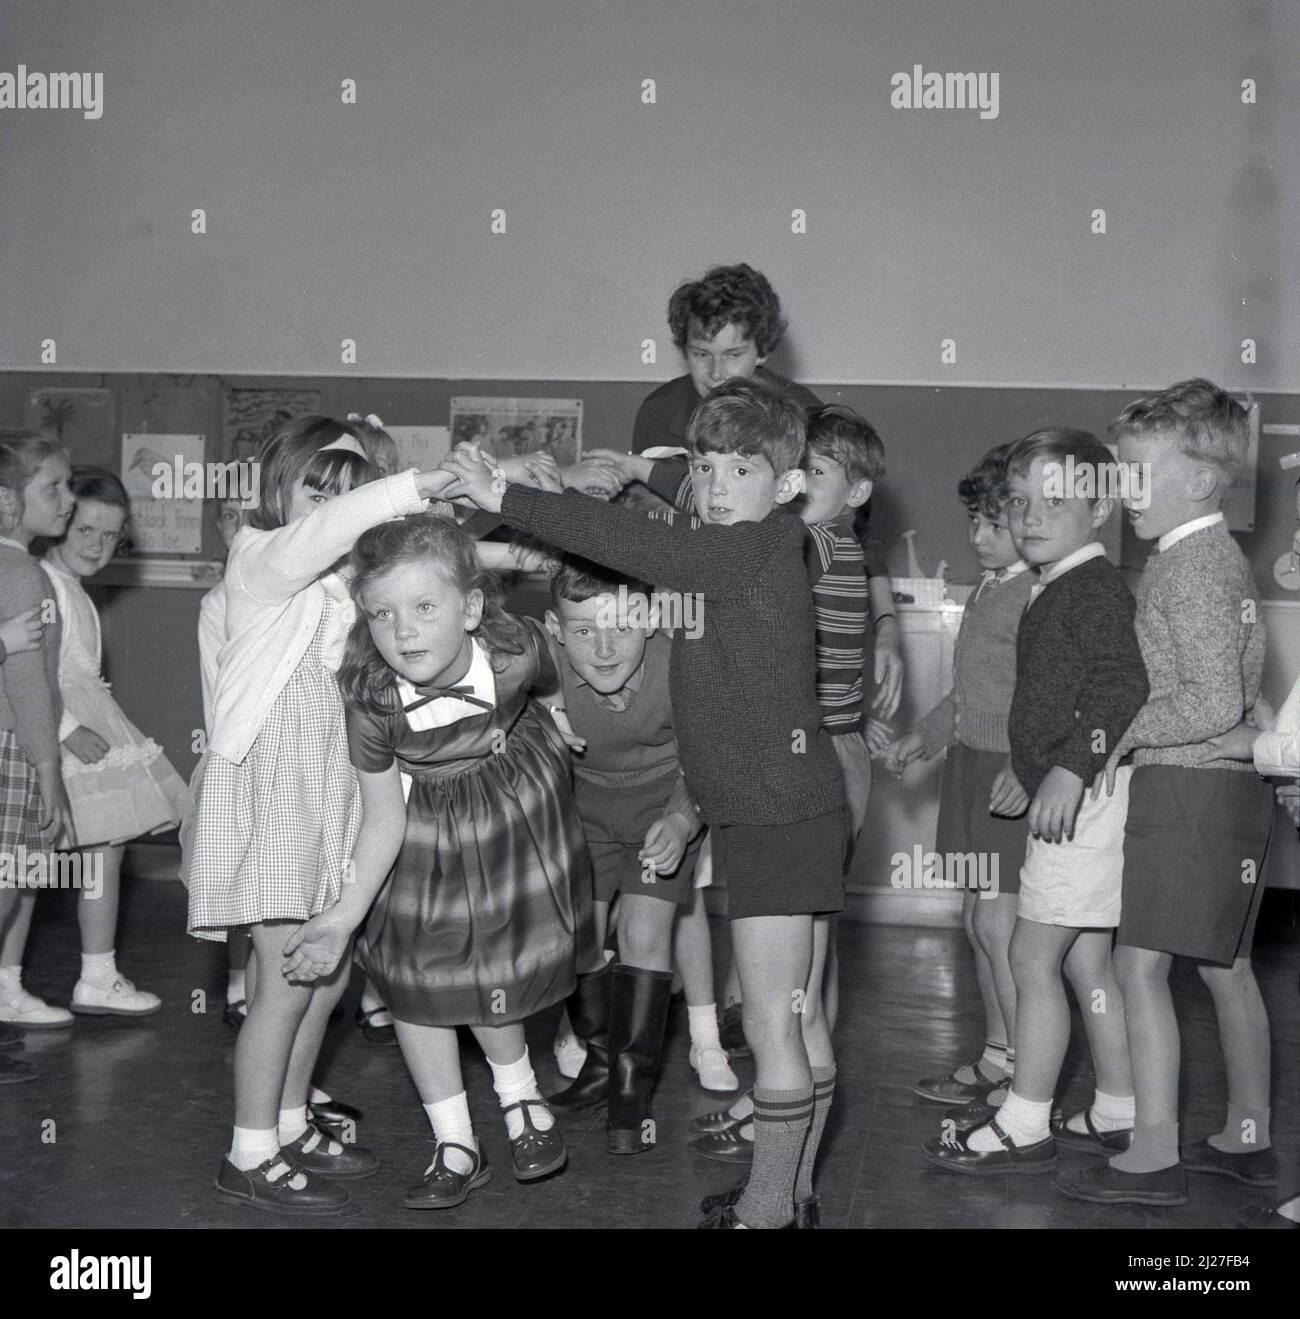 1960s, historical, primary school children playing a singing game in the classroom, possibly the one called 'Oranges and Lemons', where children move or dance through an arch made by children holding hands, facing each other, arms raised, Fife, Scotland, UK. The game is also known as 'London Bridge is Falling Down', where again two or more children join hands to form an arch, the bridge, where the other choldren march under. In Scotland it is also known as 'broken bridges'. Stock Photo